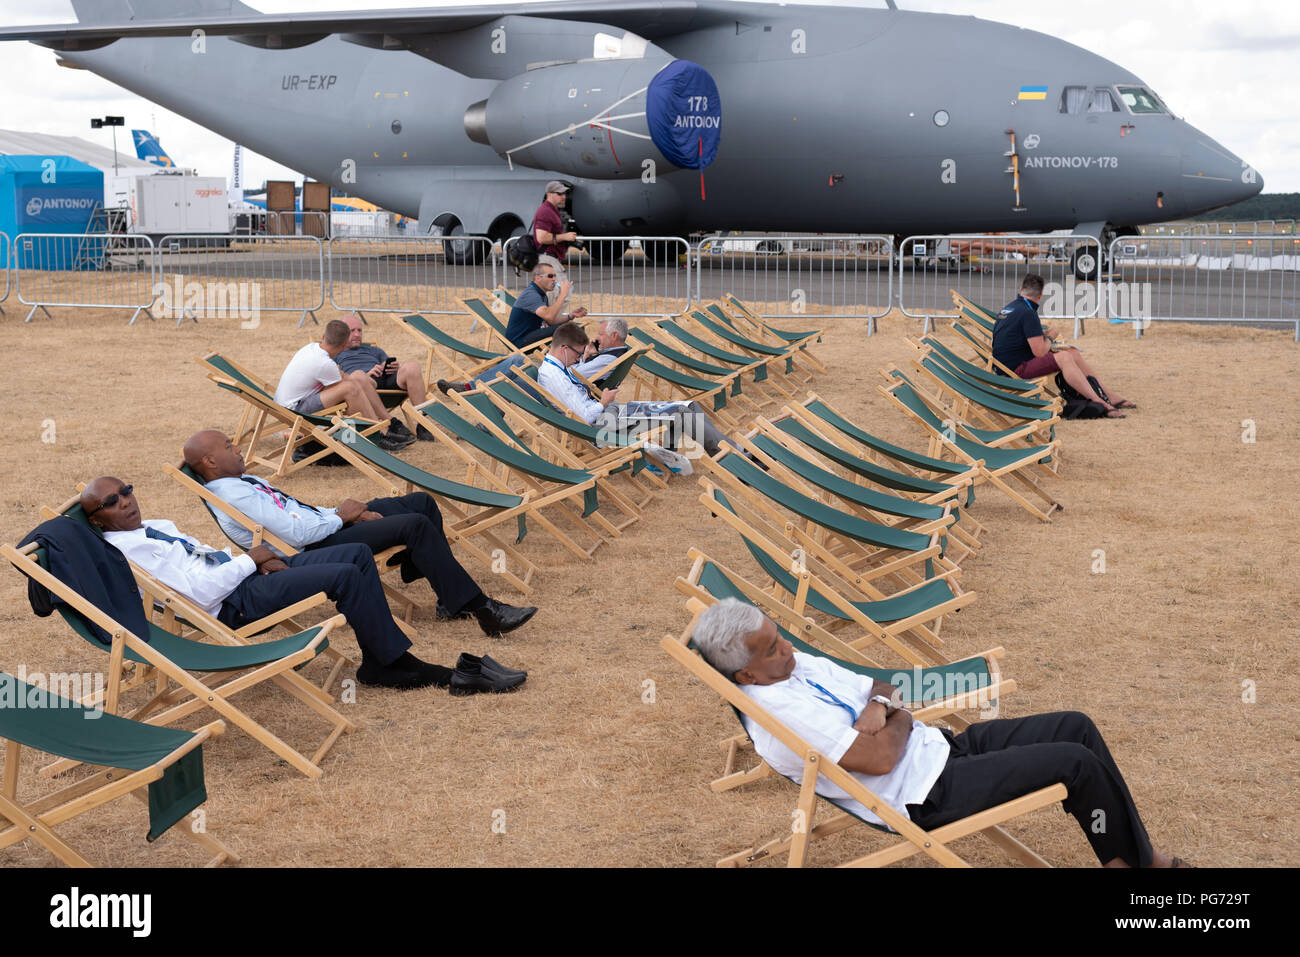 Relaxing in deckchairs at the Farnborough Airshow with a Russian Antonov 178 in background and scorched grass from a summer heatwave Stock Photo